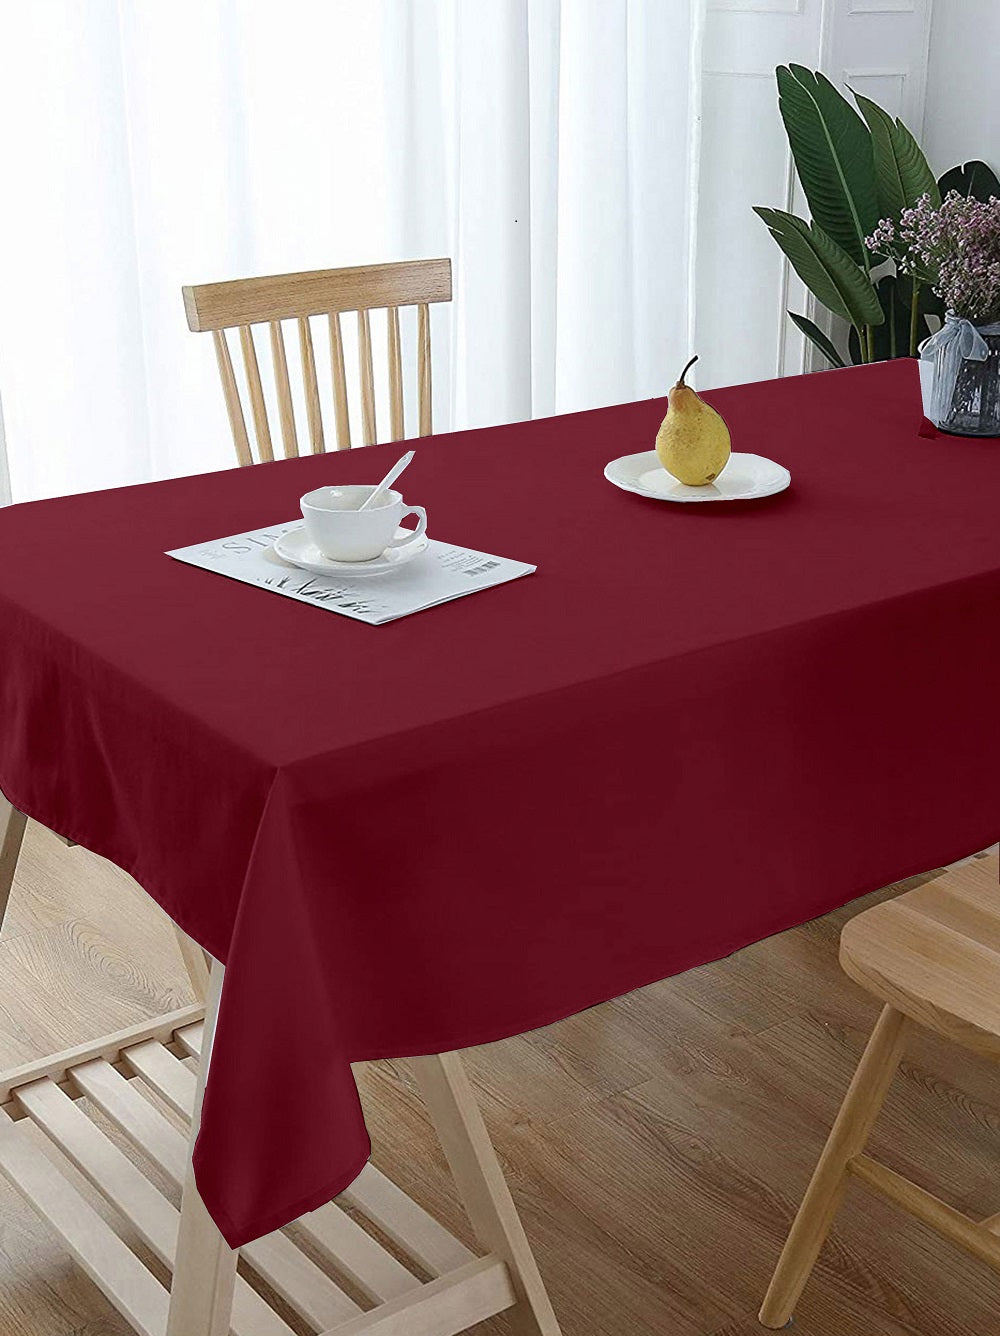 Lushomes dining table cover 6 seater, Maroon Classic Plain Dining Table Cover Cloth, table cloth for 6 seater dining table, table cover 6 seater  (Size 60 x 70”, 6 Seater Table Cloth)